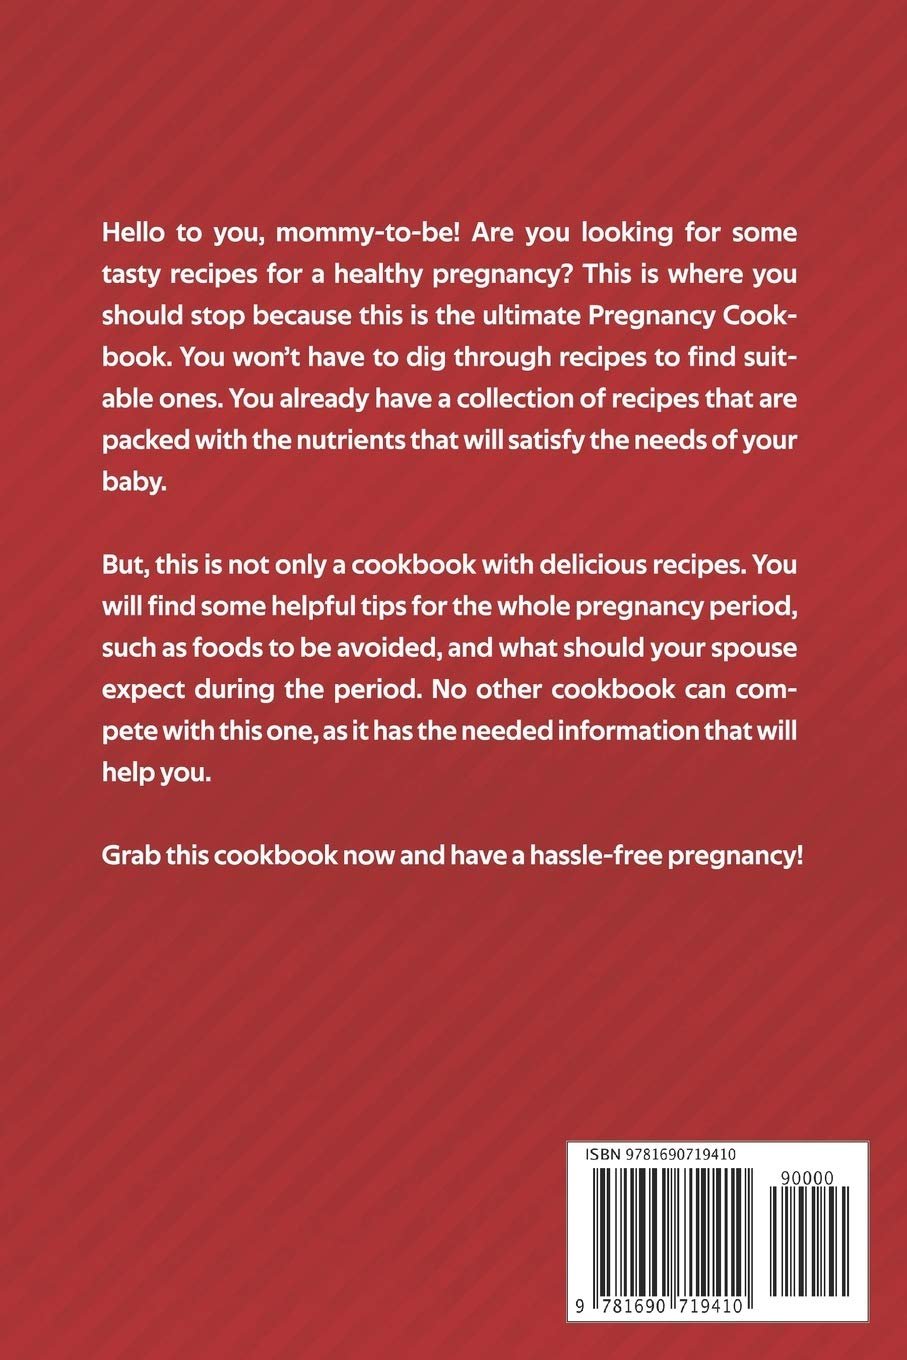 The Must-Have Pregnancy Cookbook: The Guide to a Healthy Pregnancy     Paperback – September 3, 2019